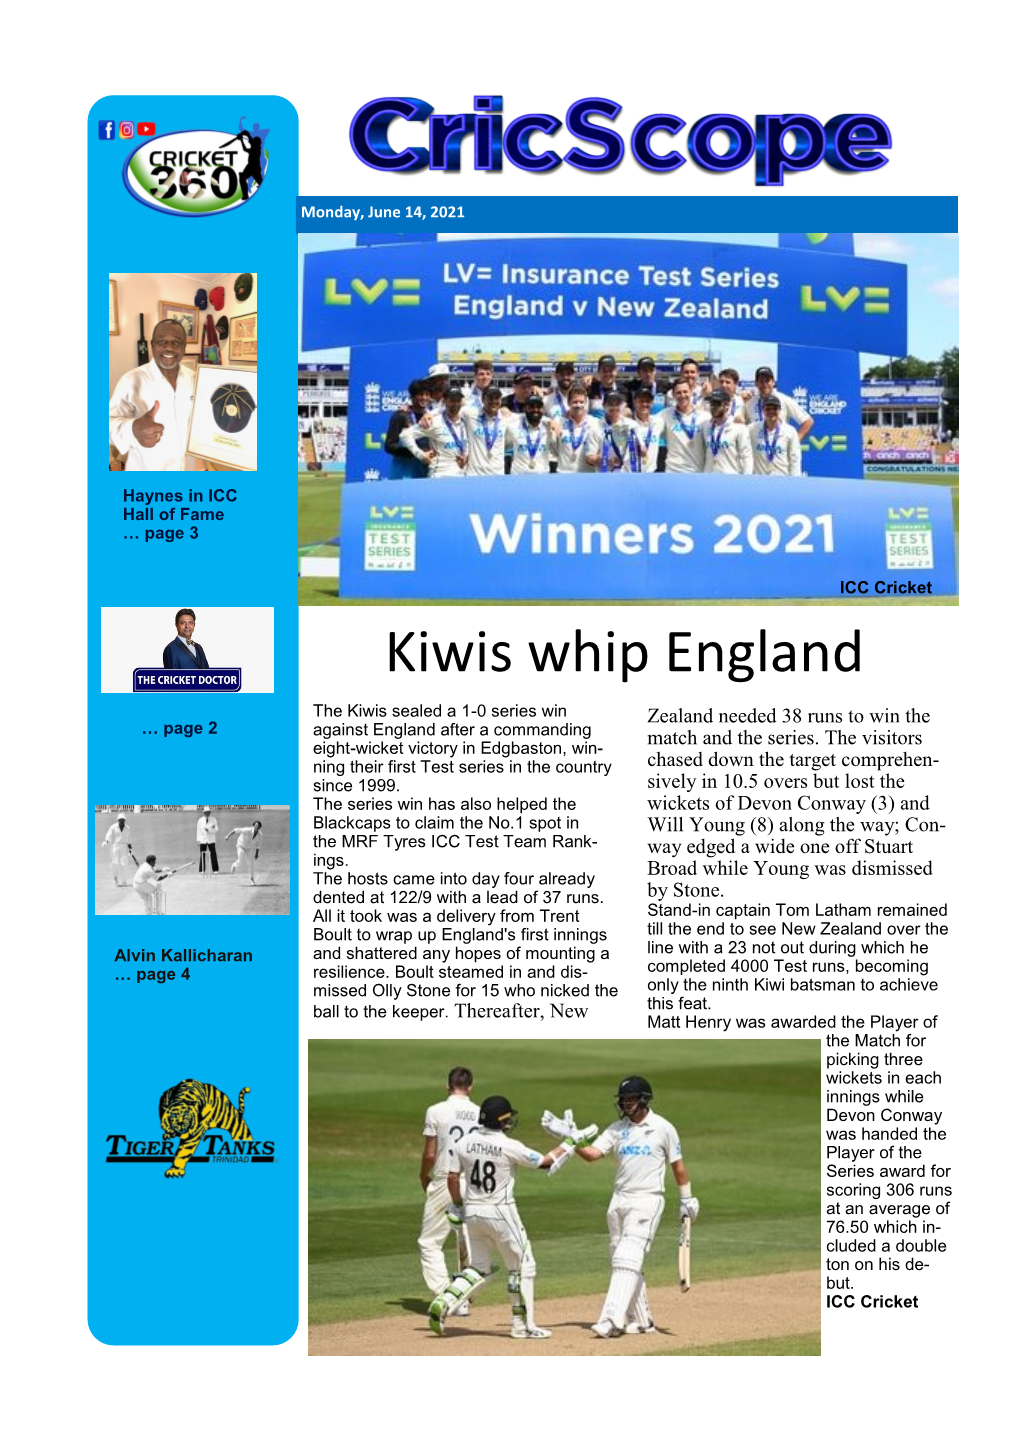 Kiwis Whip England the Kiwis Sealed a 1-0 Series Win Zealand Needed 38 Runs to Win the … Page 2 Against England After a Commanding Match and the Series